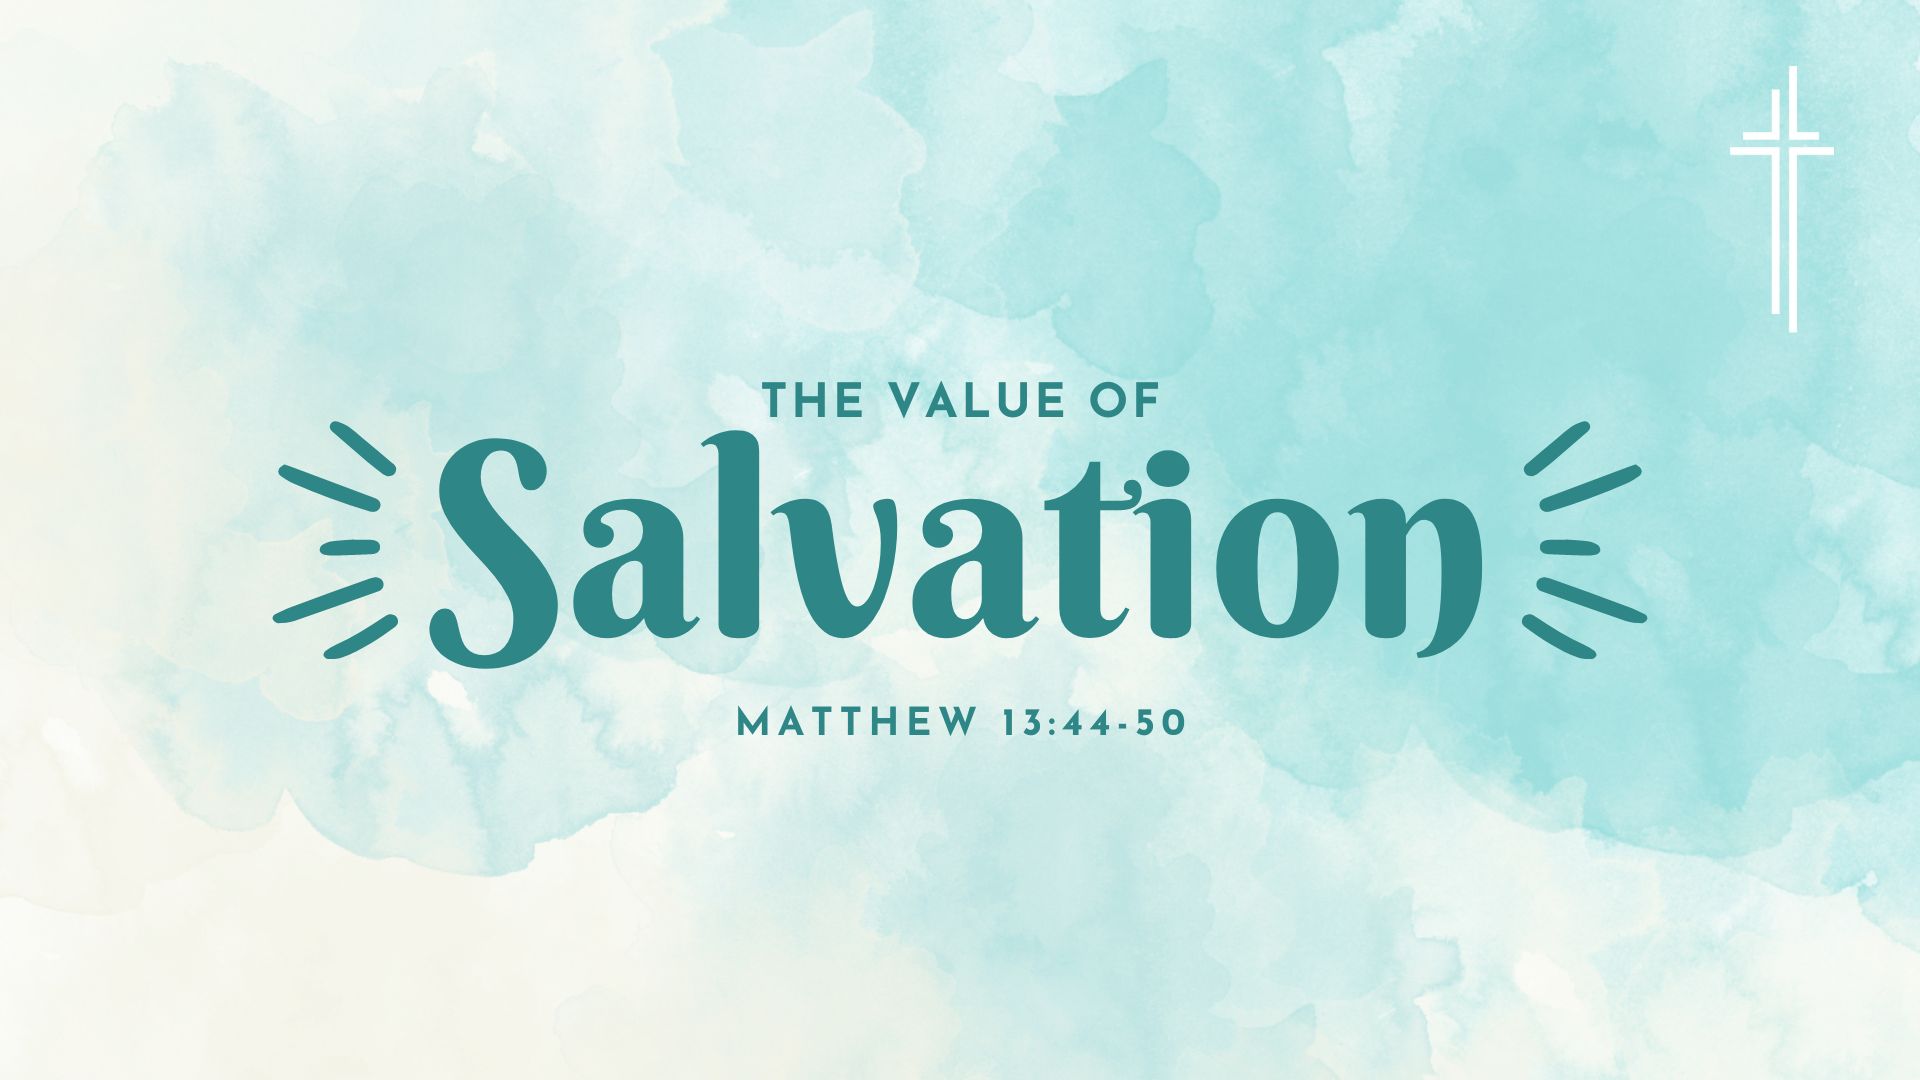 The Value of Salvation